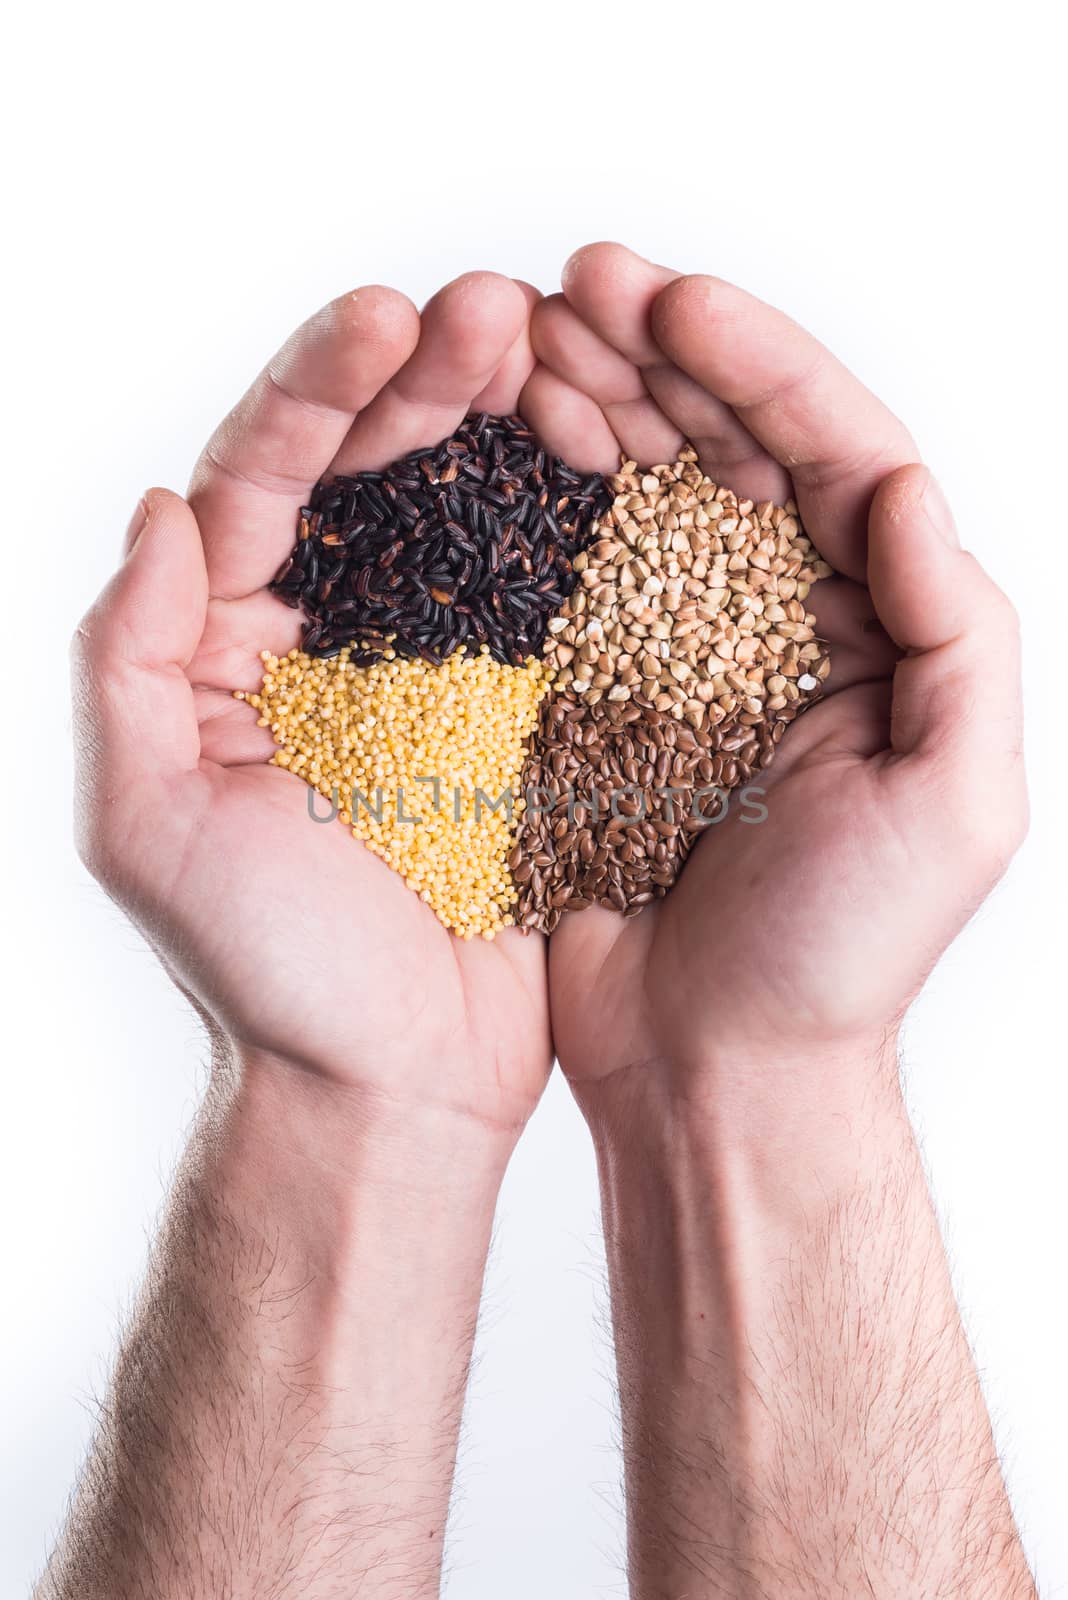 Man's hands holds gluten free coloured seeds and cereal